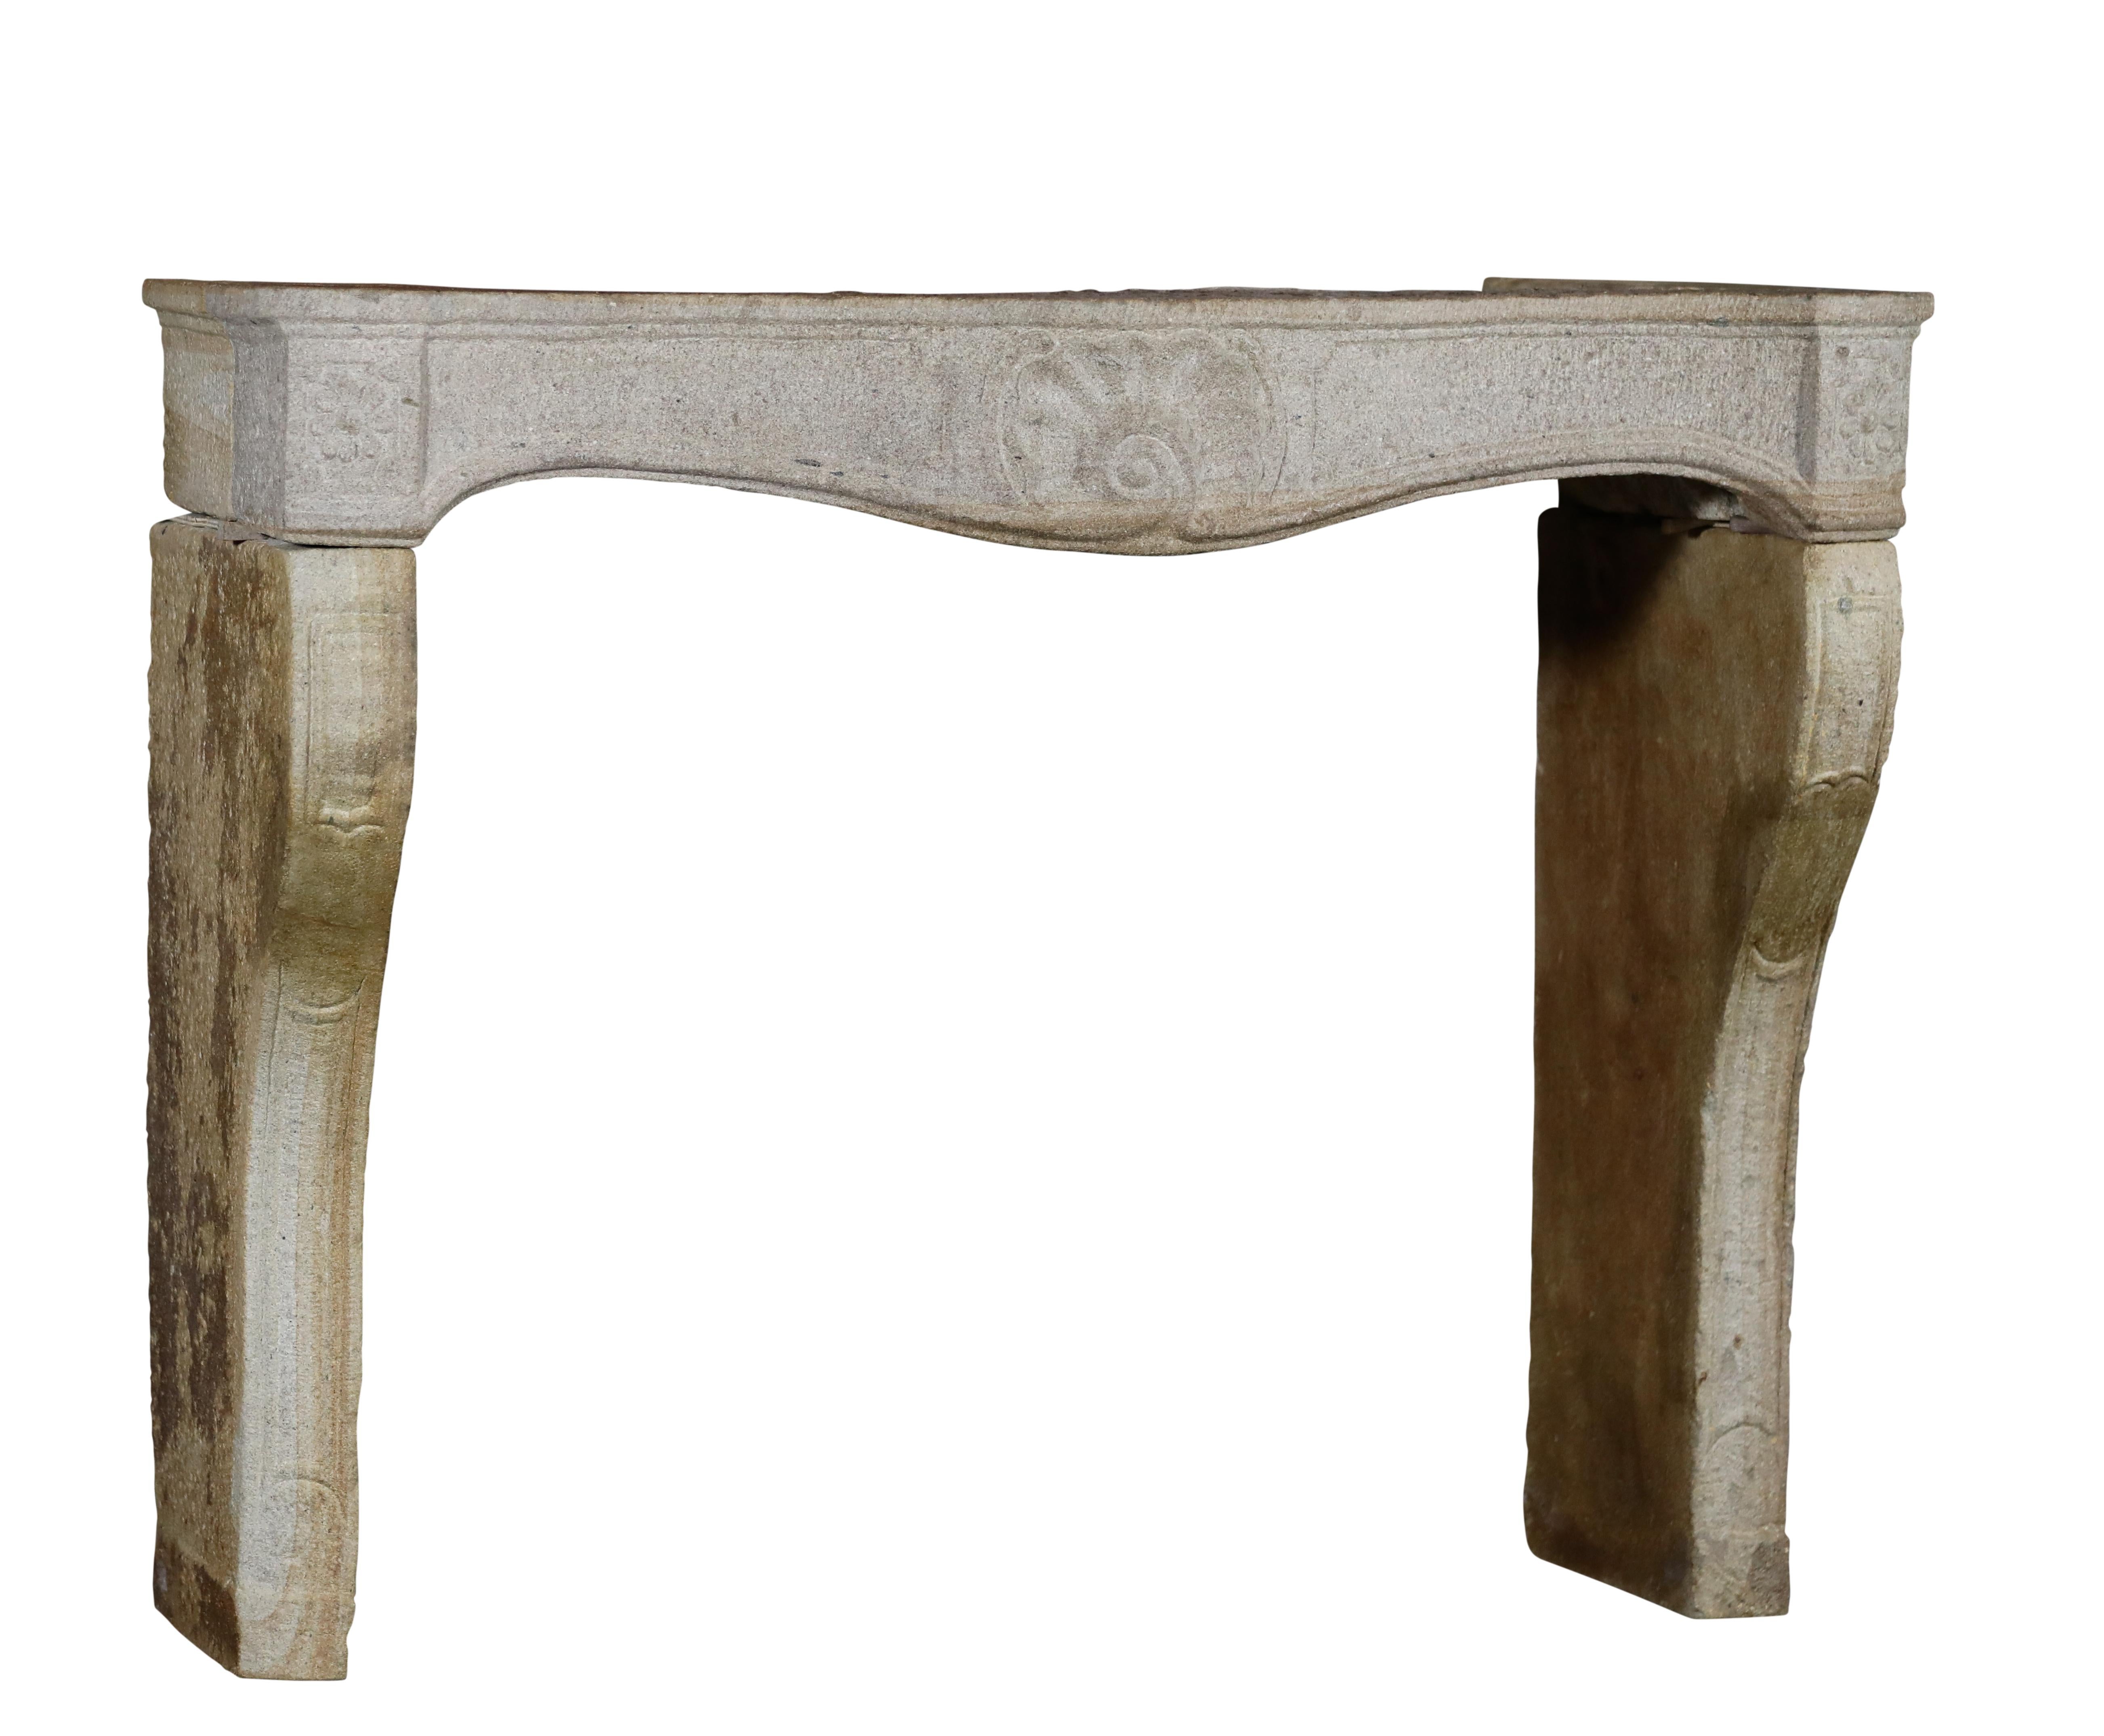 18th Century Normandy Granite Fireplace For Rustic Slow Living Interior Design For Sale 6